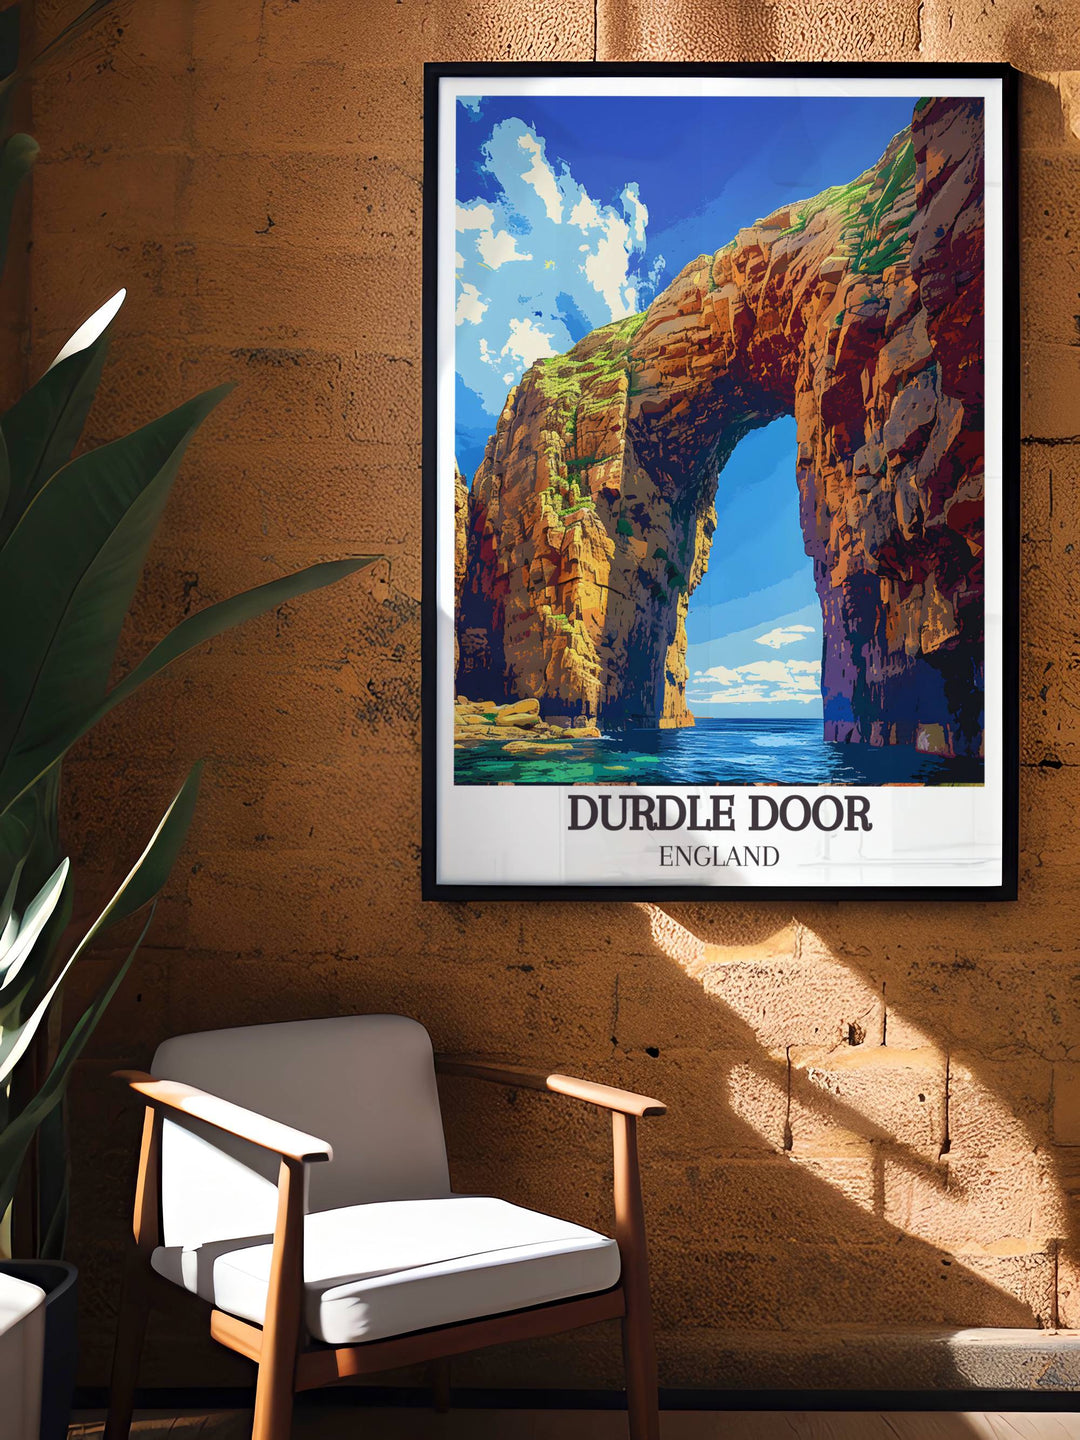 Durdle Door Arch Dorset artwork capturing the majestic beauty of the Jurassic Coast perfect for posters prints and home decor adding a touch of natural elegance to any room ideal for travel lovers and those seeking unique and meaningful gifts.